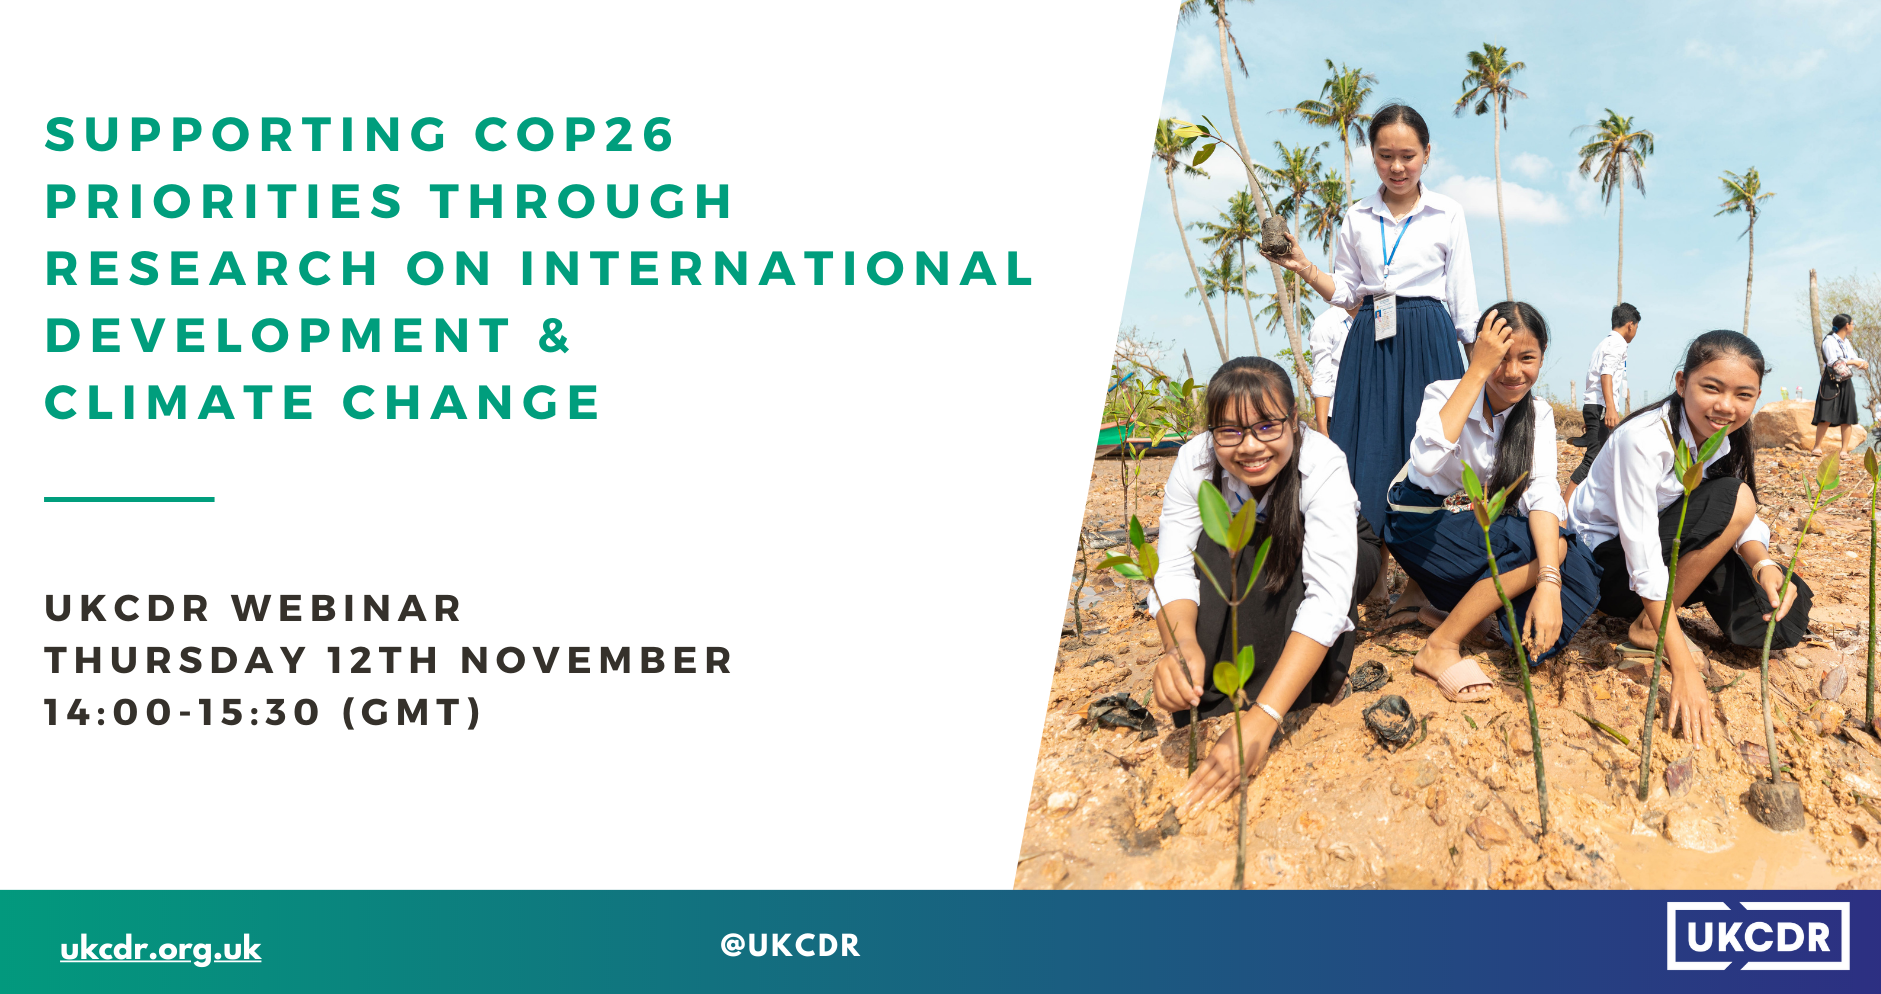 Supporting the COP26 priorities through research on international development and climate change